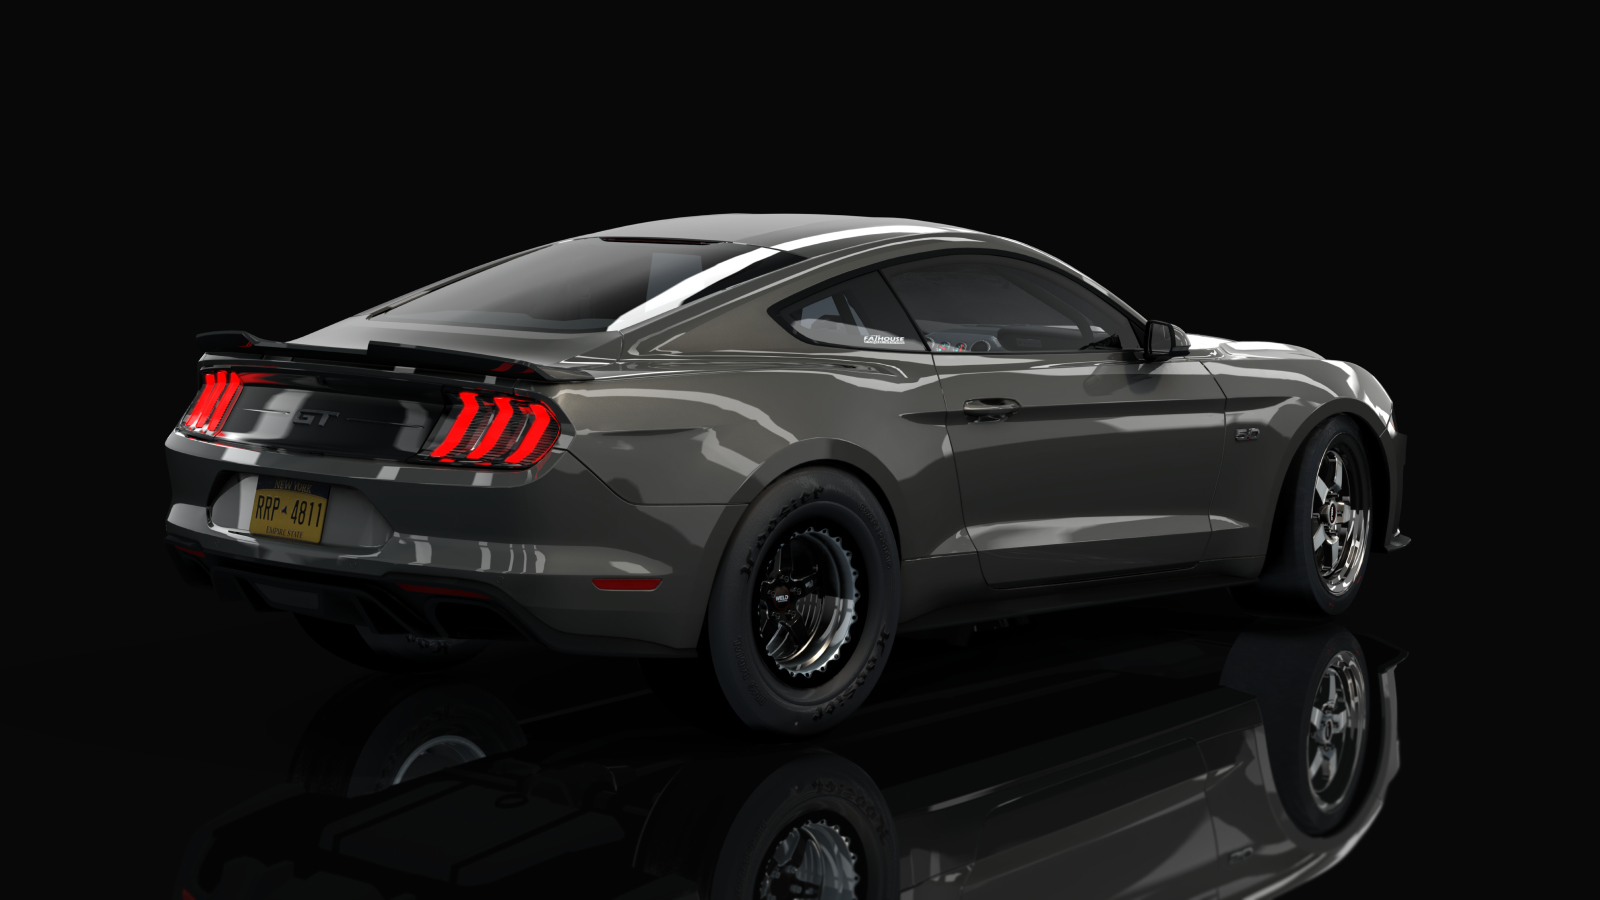 Ford Mustang GT 2018 1500Rx, skin Magnetic